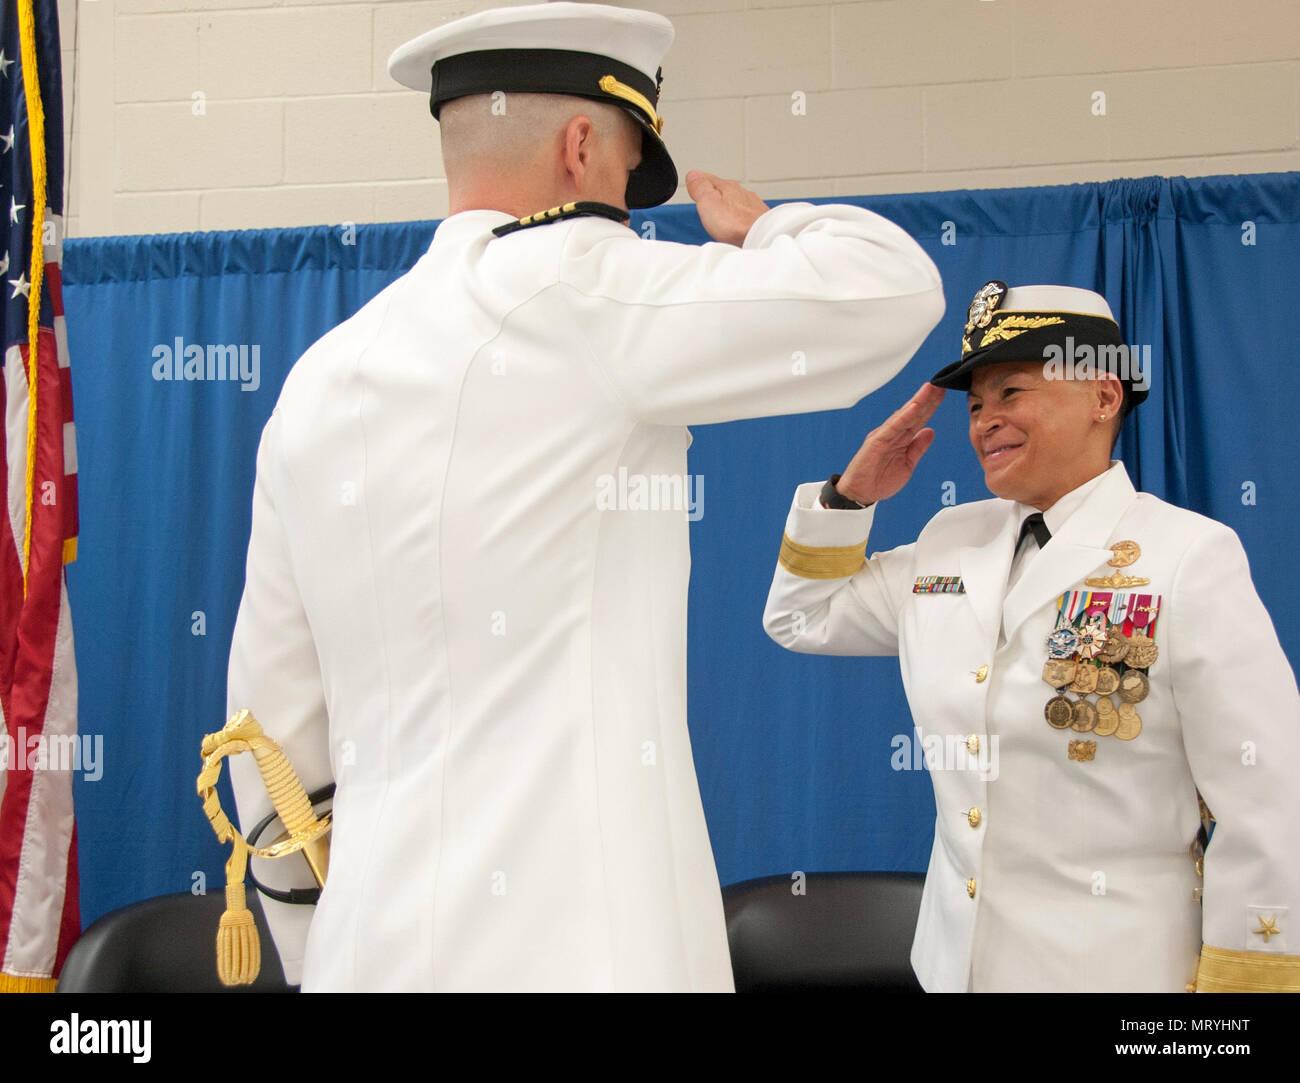 170714-N-AP176-092 MILLINGTON, Tenn.  (July 14, 2017) Capt. David Bryson, outgoing commanding officer, Naval Support Activity Mid-South, reports to Rear Adm. Bette Bolivar, commander, Navy Region Southeast, as he relinquishes command of NSA Mid-South. (U.S. Navy photo by Mass Communication Specialist 1st Class Jeff Atherton/released) Stock Photo